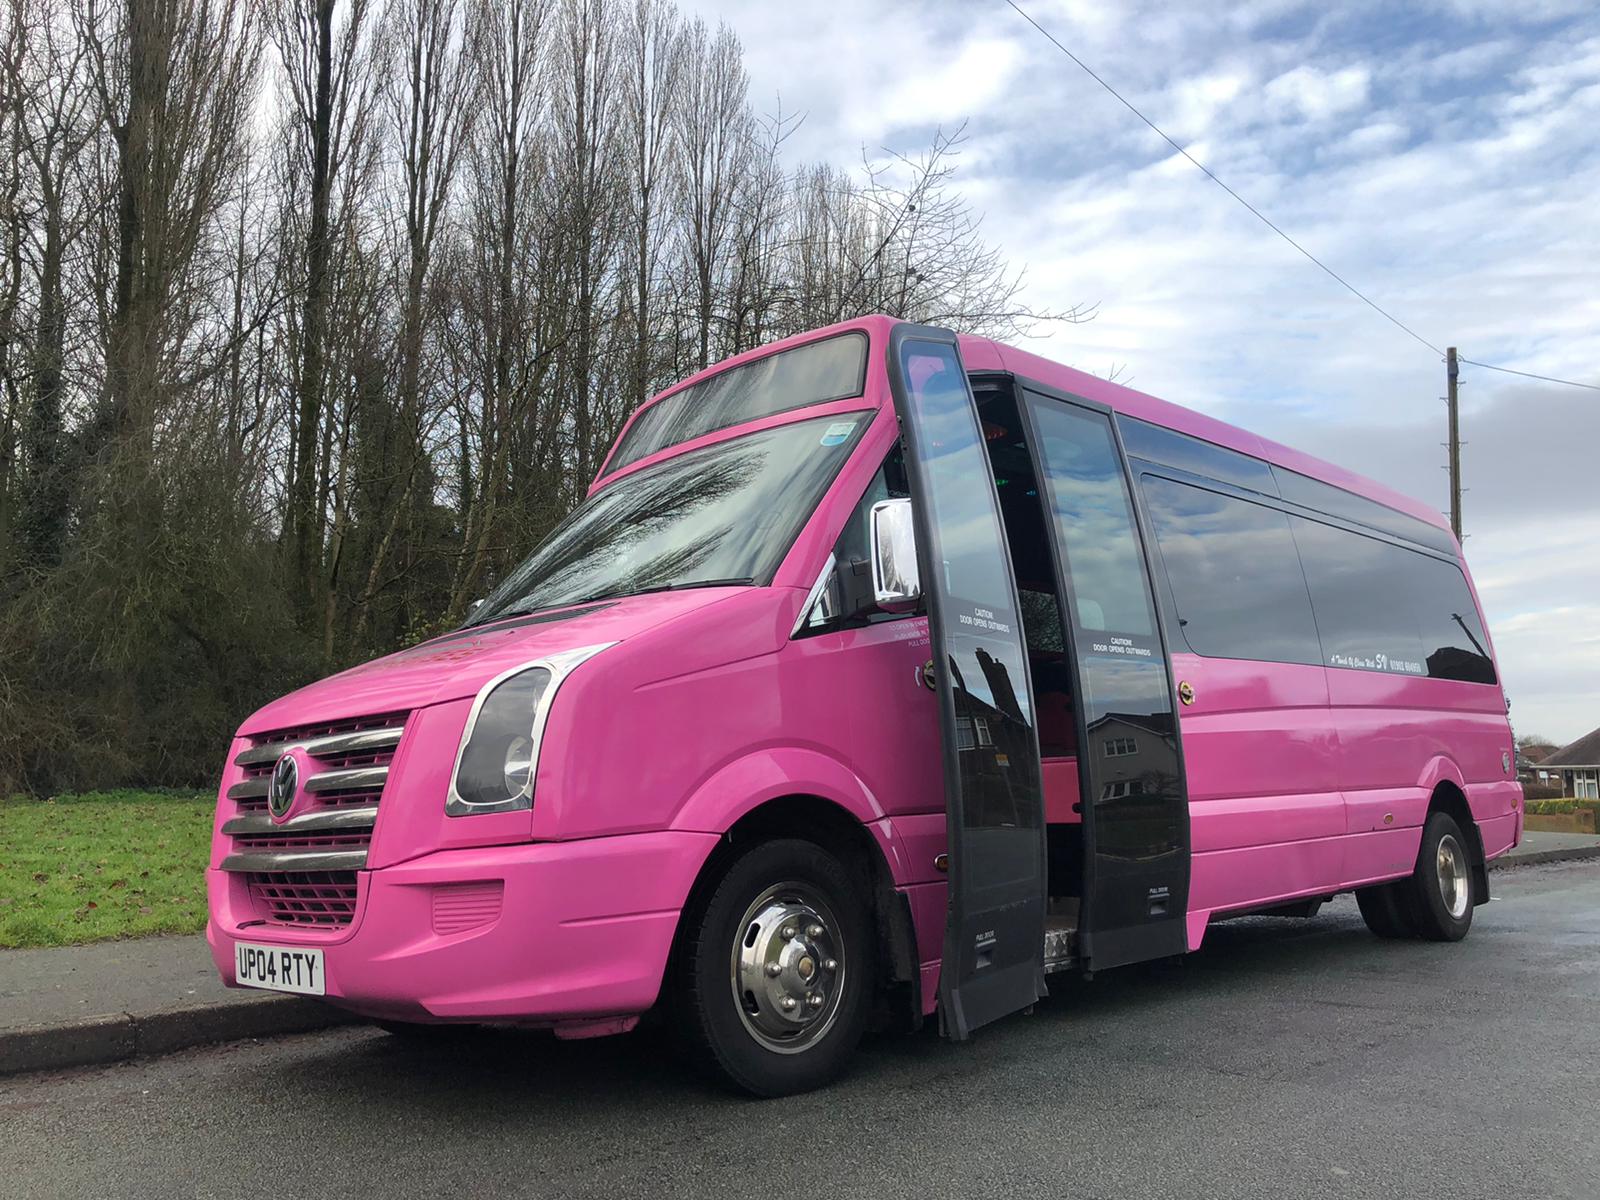 Maximise Your Party Experience: What to Expect When Booking a Party Bus in Somerset